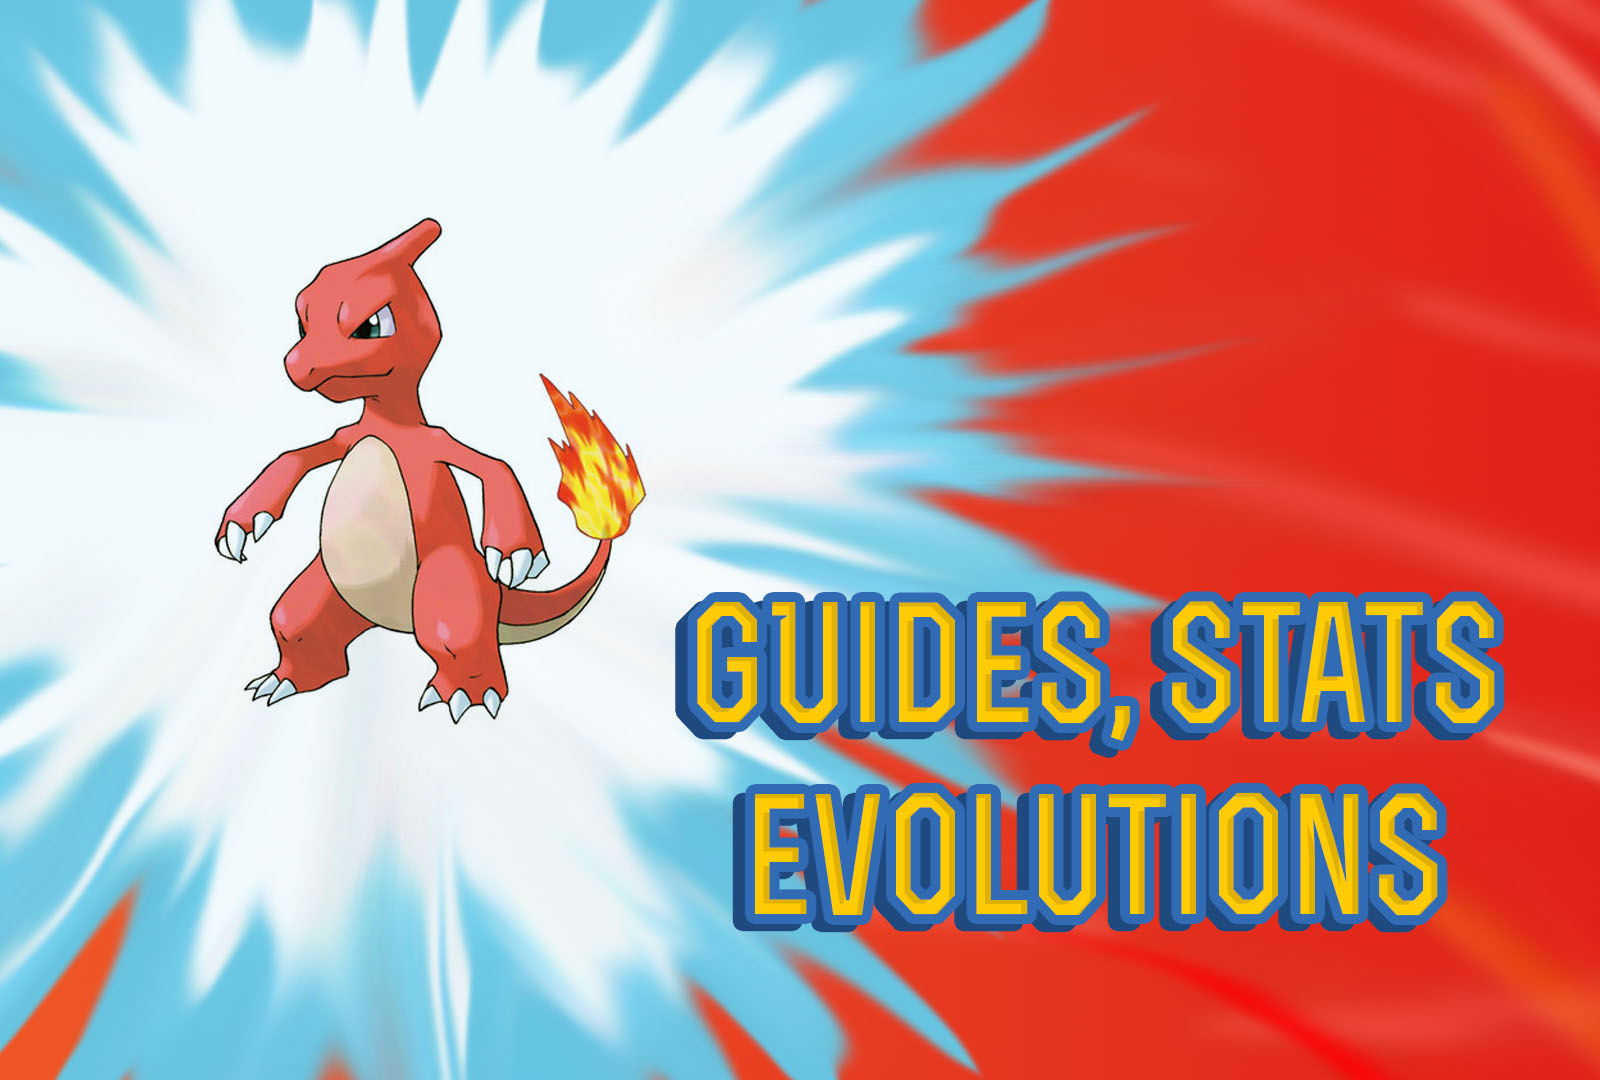 Pokemon Lets Go Charmeleon Guide, Stats, Evolutions and More